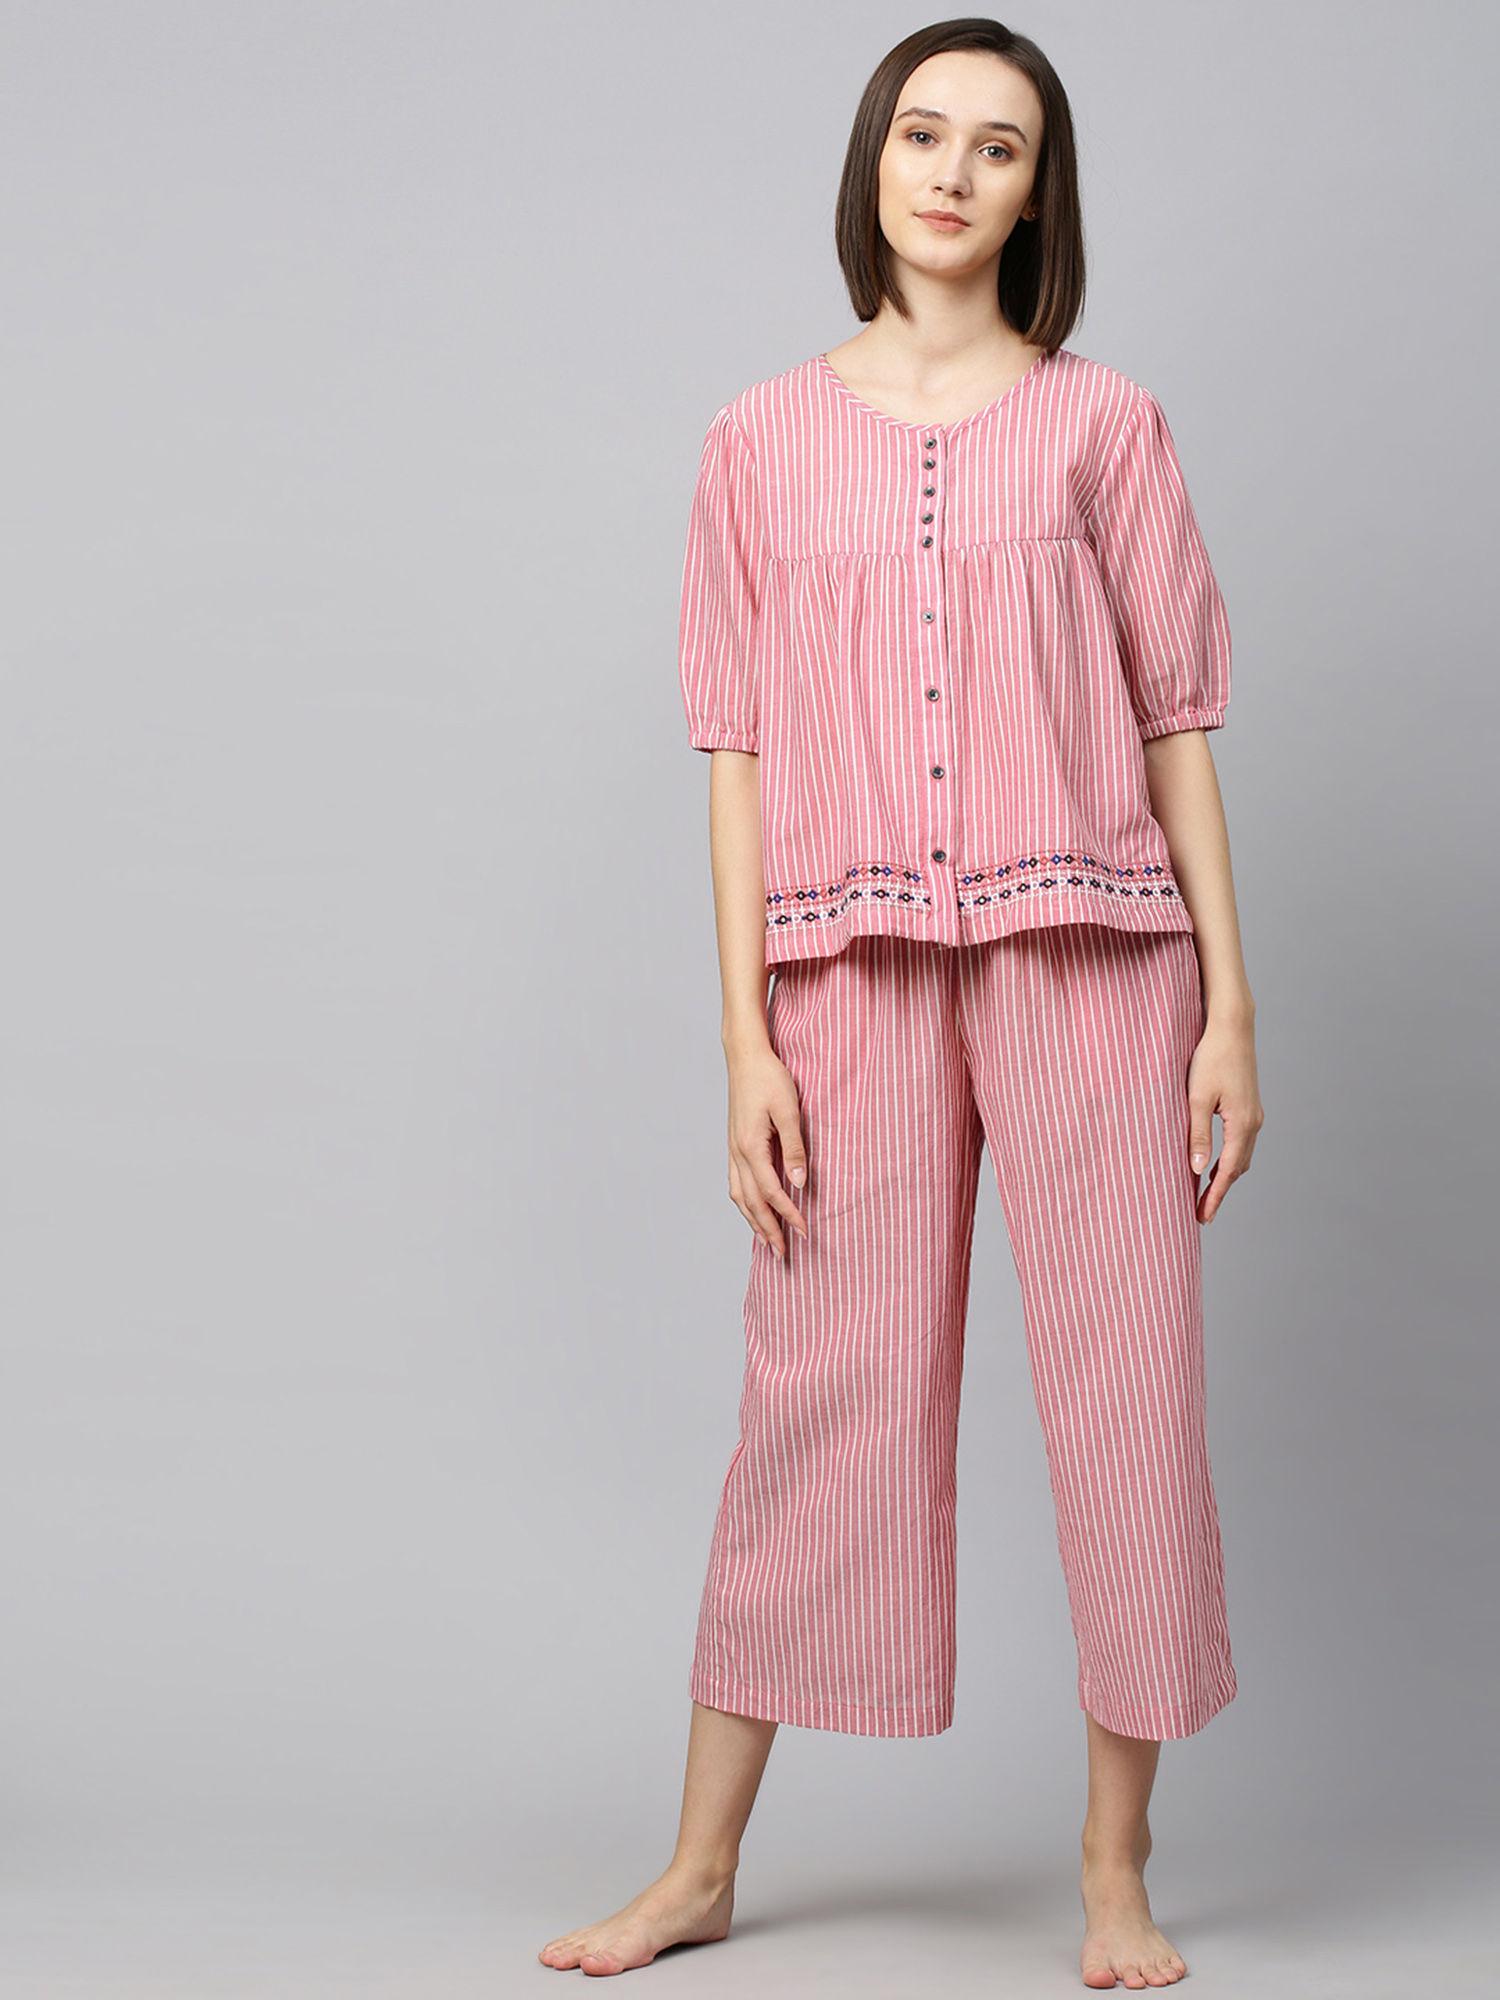 embroidered striped lounge set - pink